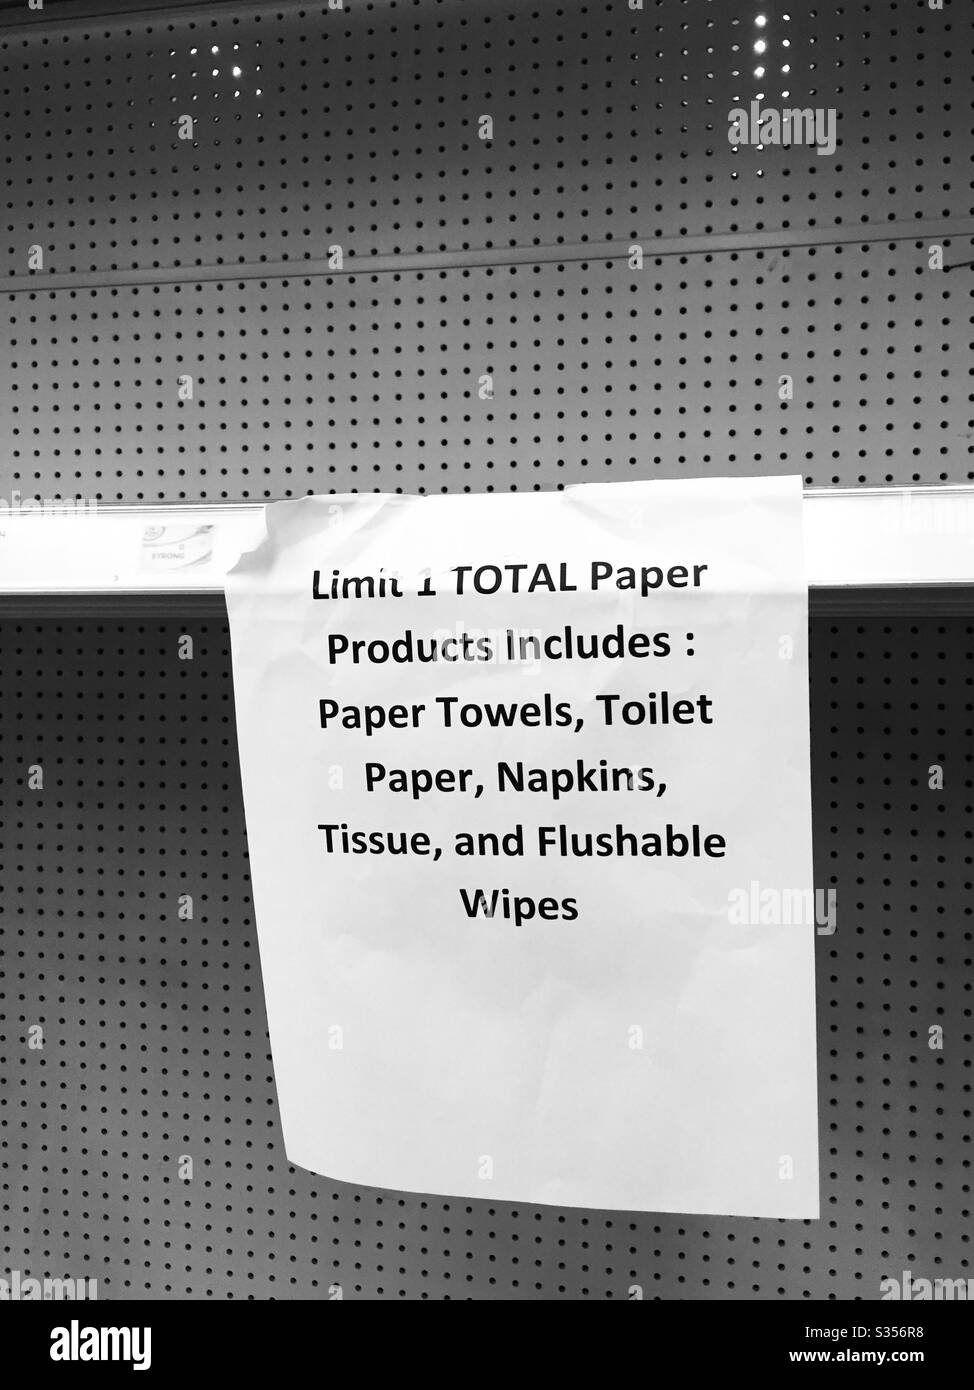 Empty grocery store shelves, previously stocked with paper towels, toilet paper and tissue, with limit of one per person. Galveston Texas April 11, 2020 Stock Photo